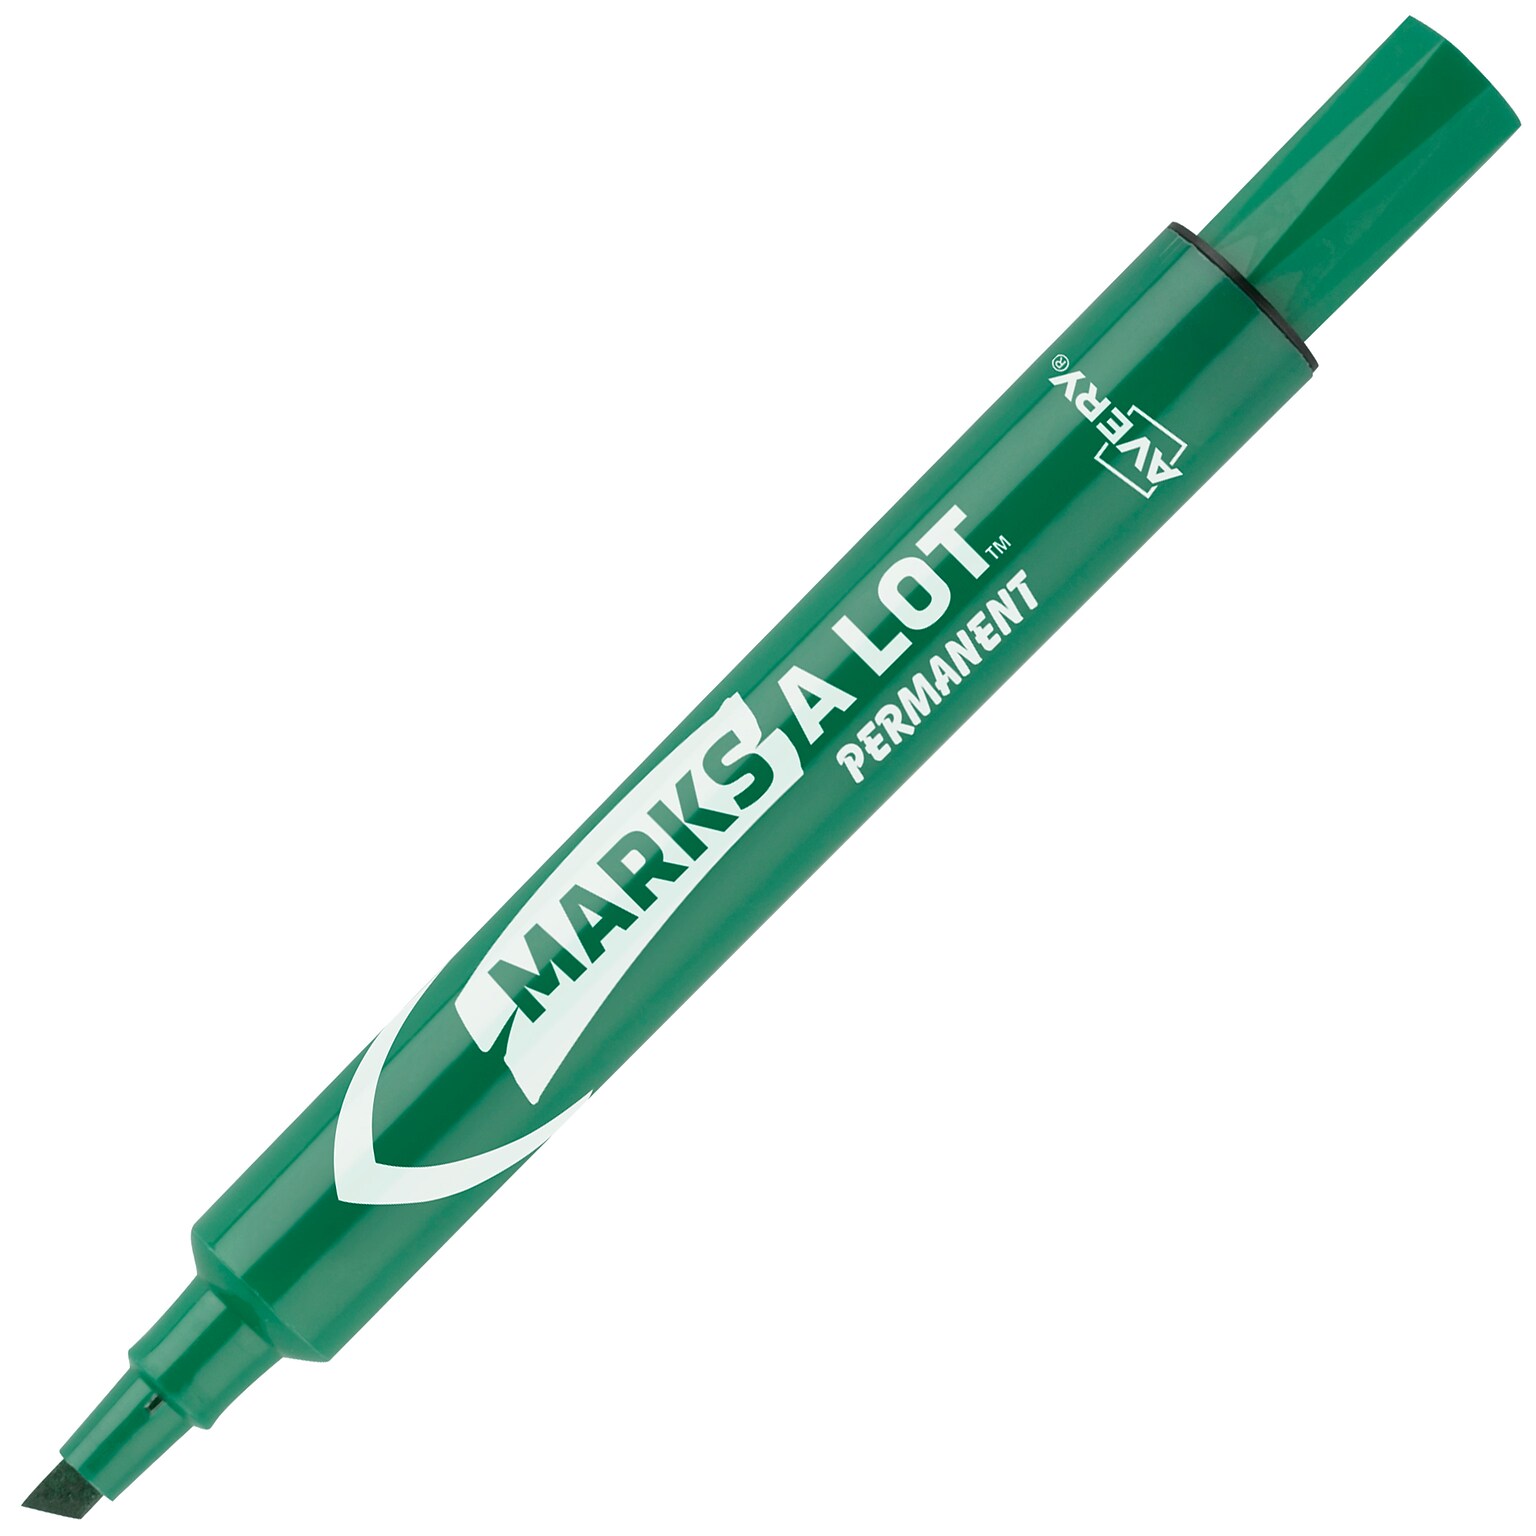 Avery Marks A Lot Tank Permanent Marker, Chisel Tip, Green (08885)